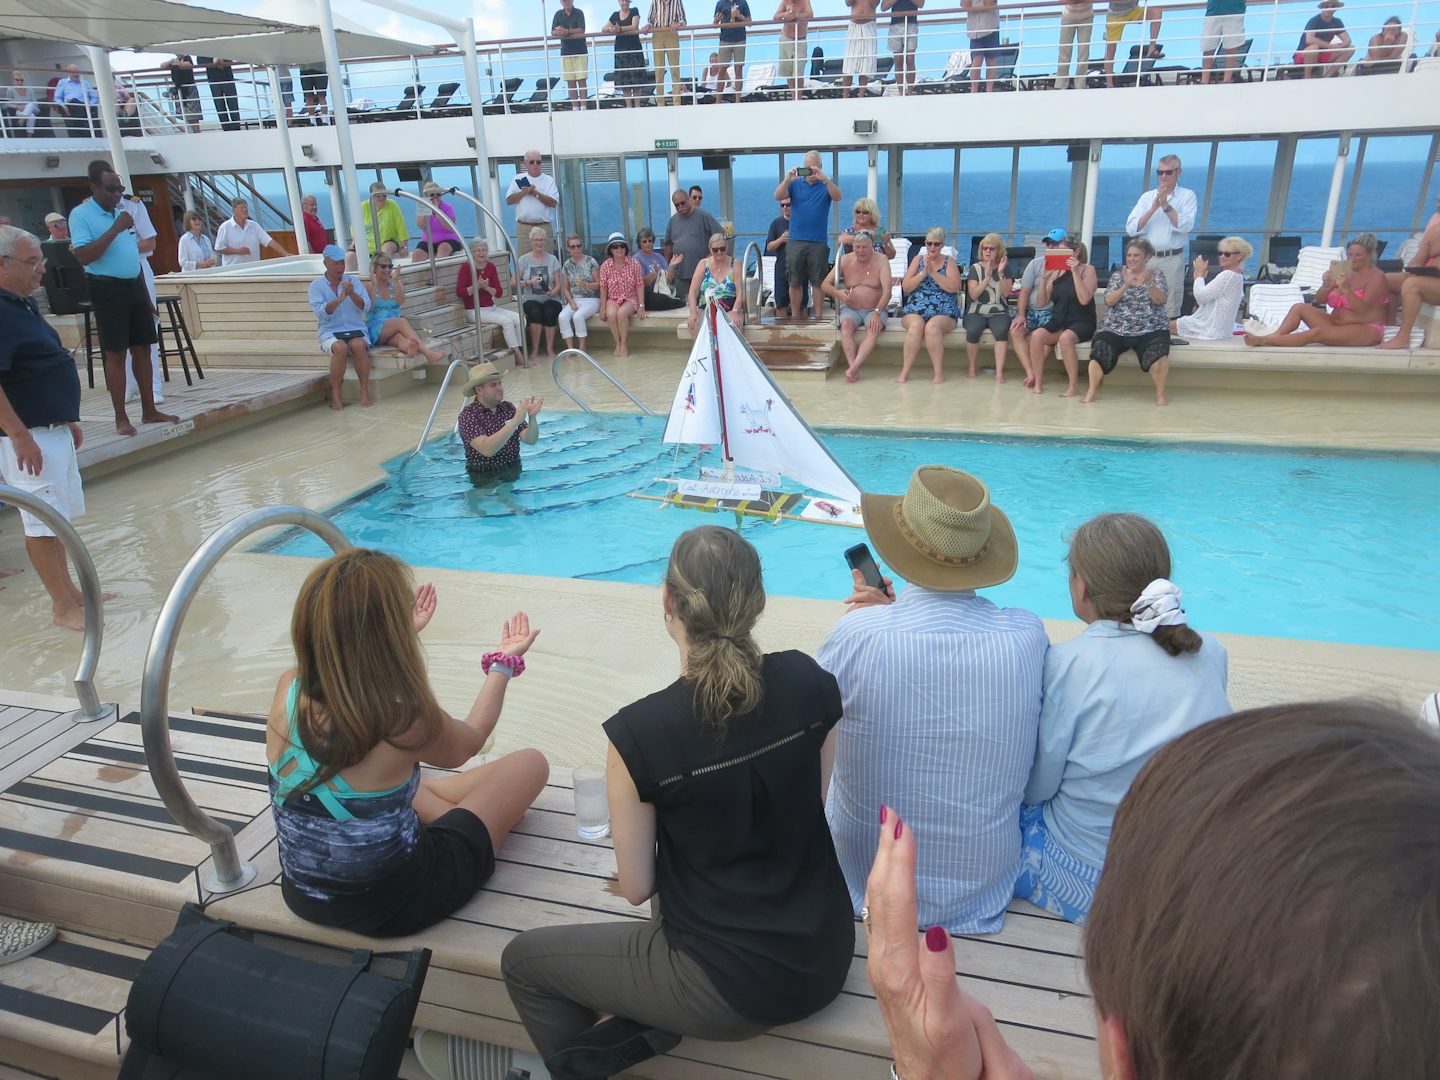 What to do with 12 days at sea?  How about a make-your-own-boat competition